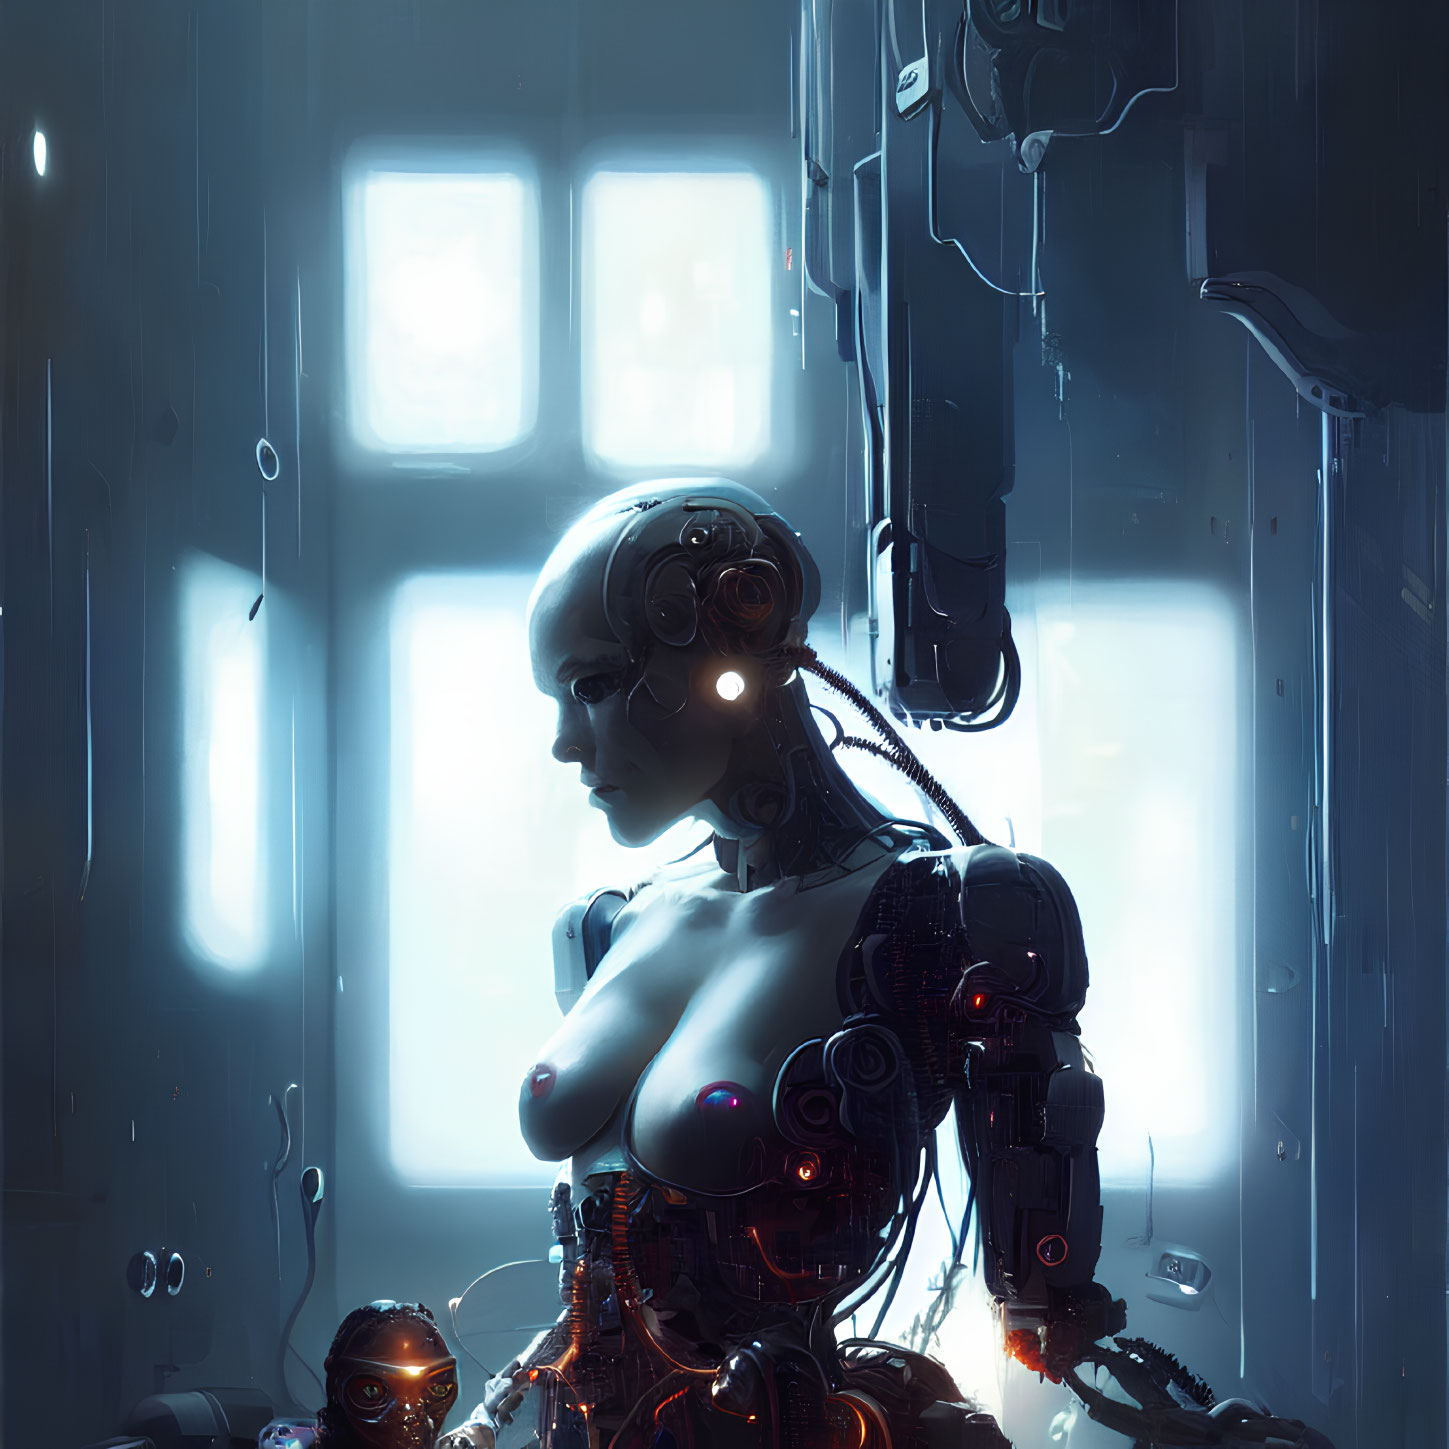 Futuristic female android with intricate mechanical details in contemplation